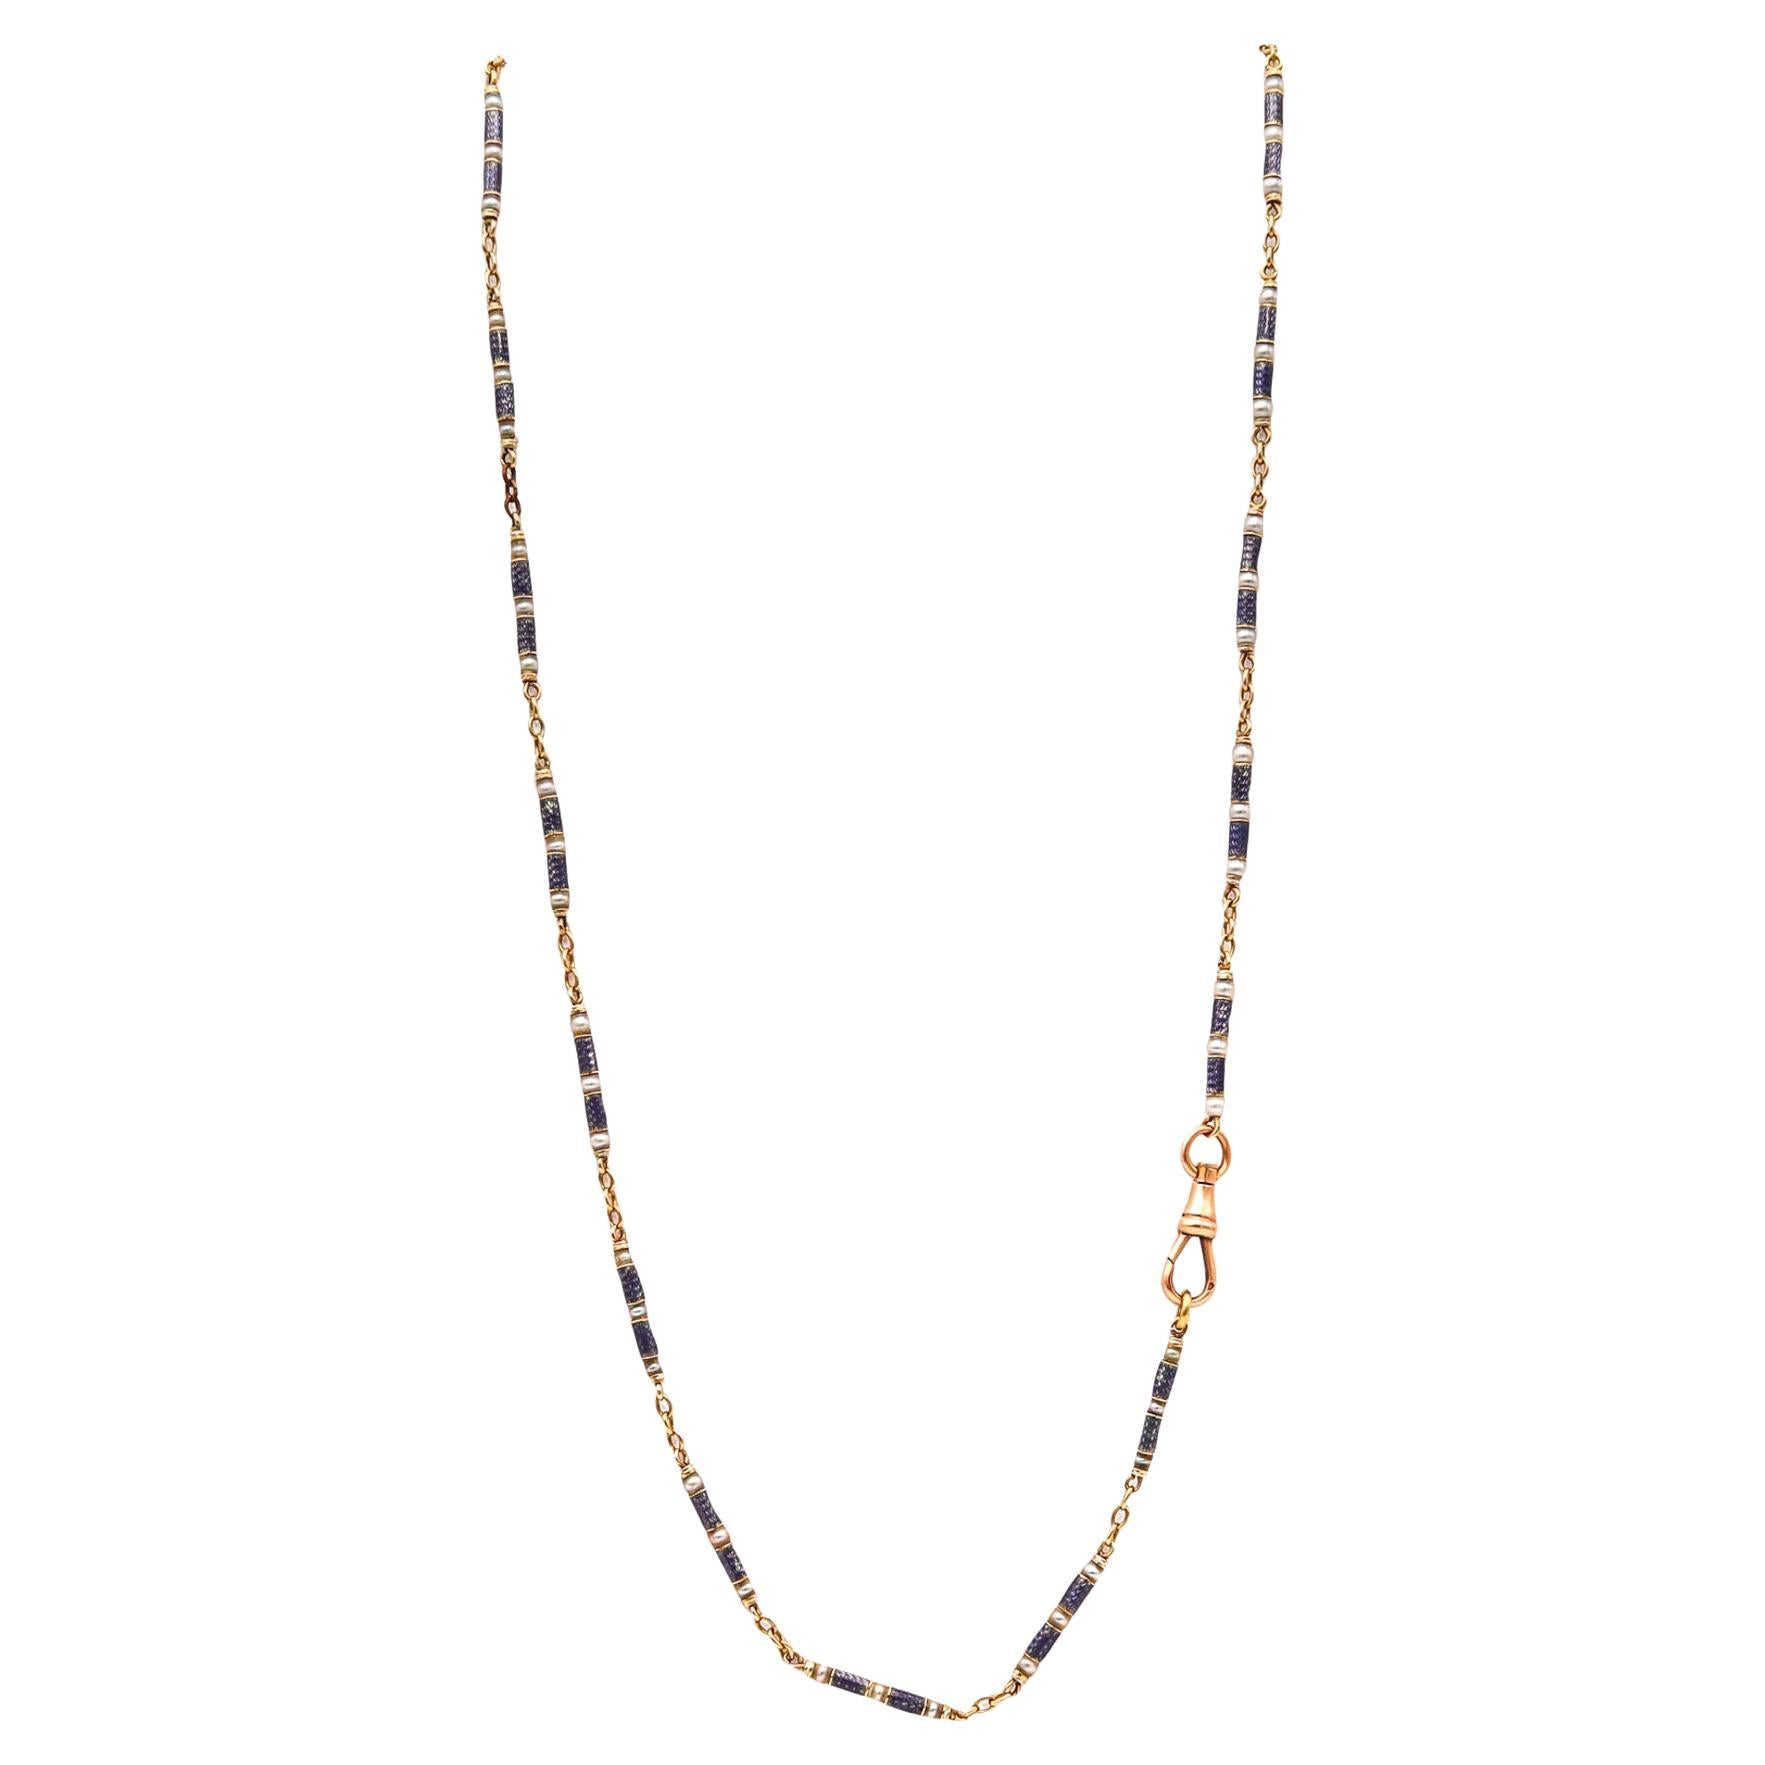 French Edwardian 1905 Chain In 18Kt Gold With Guilloche Blue Enamel and Pearls For Sale